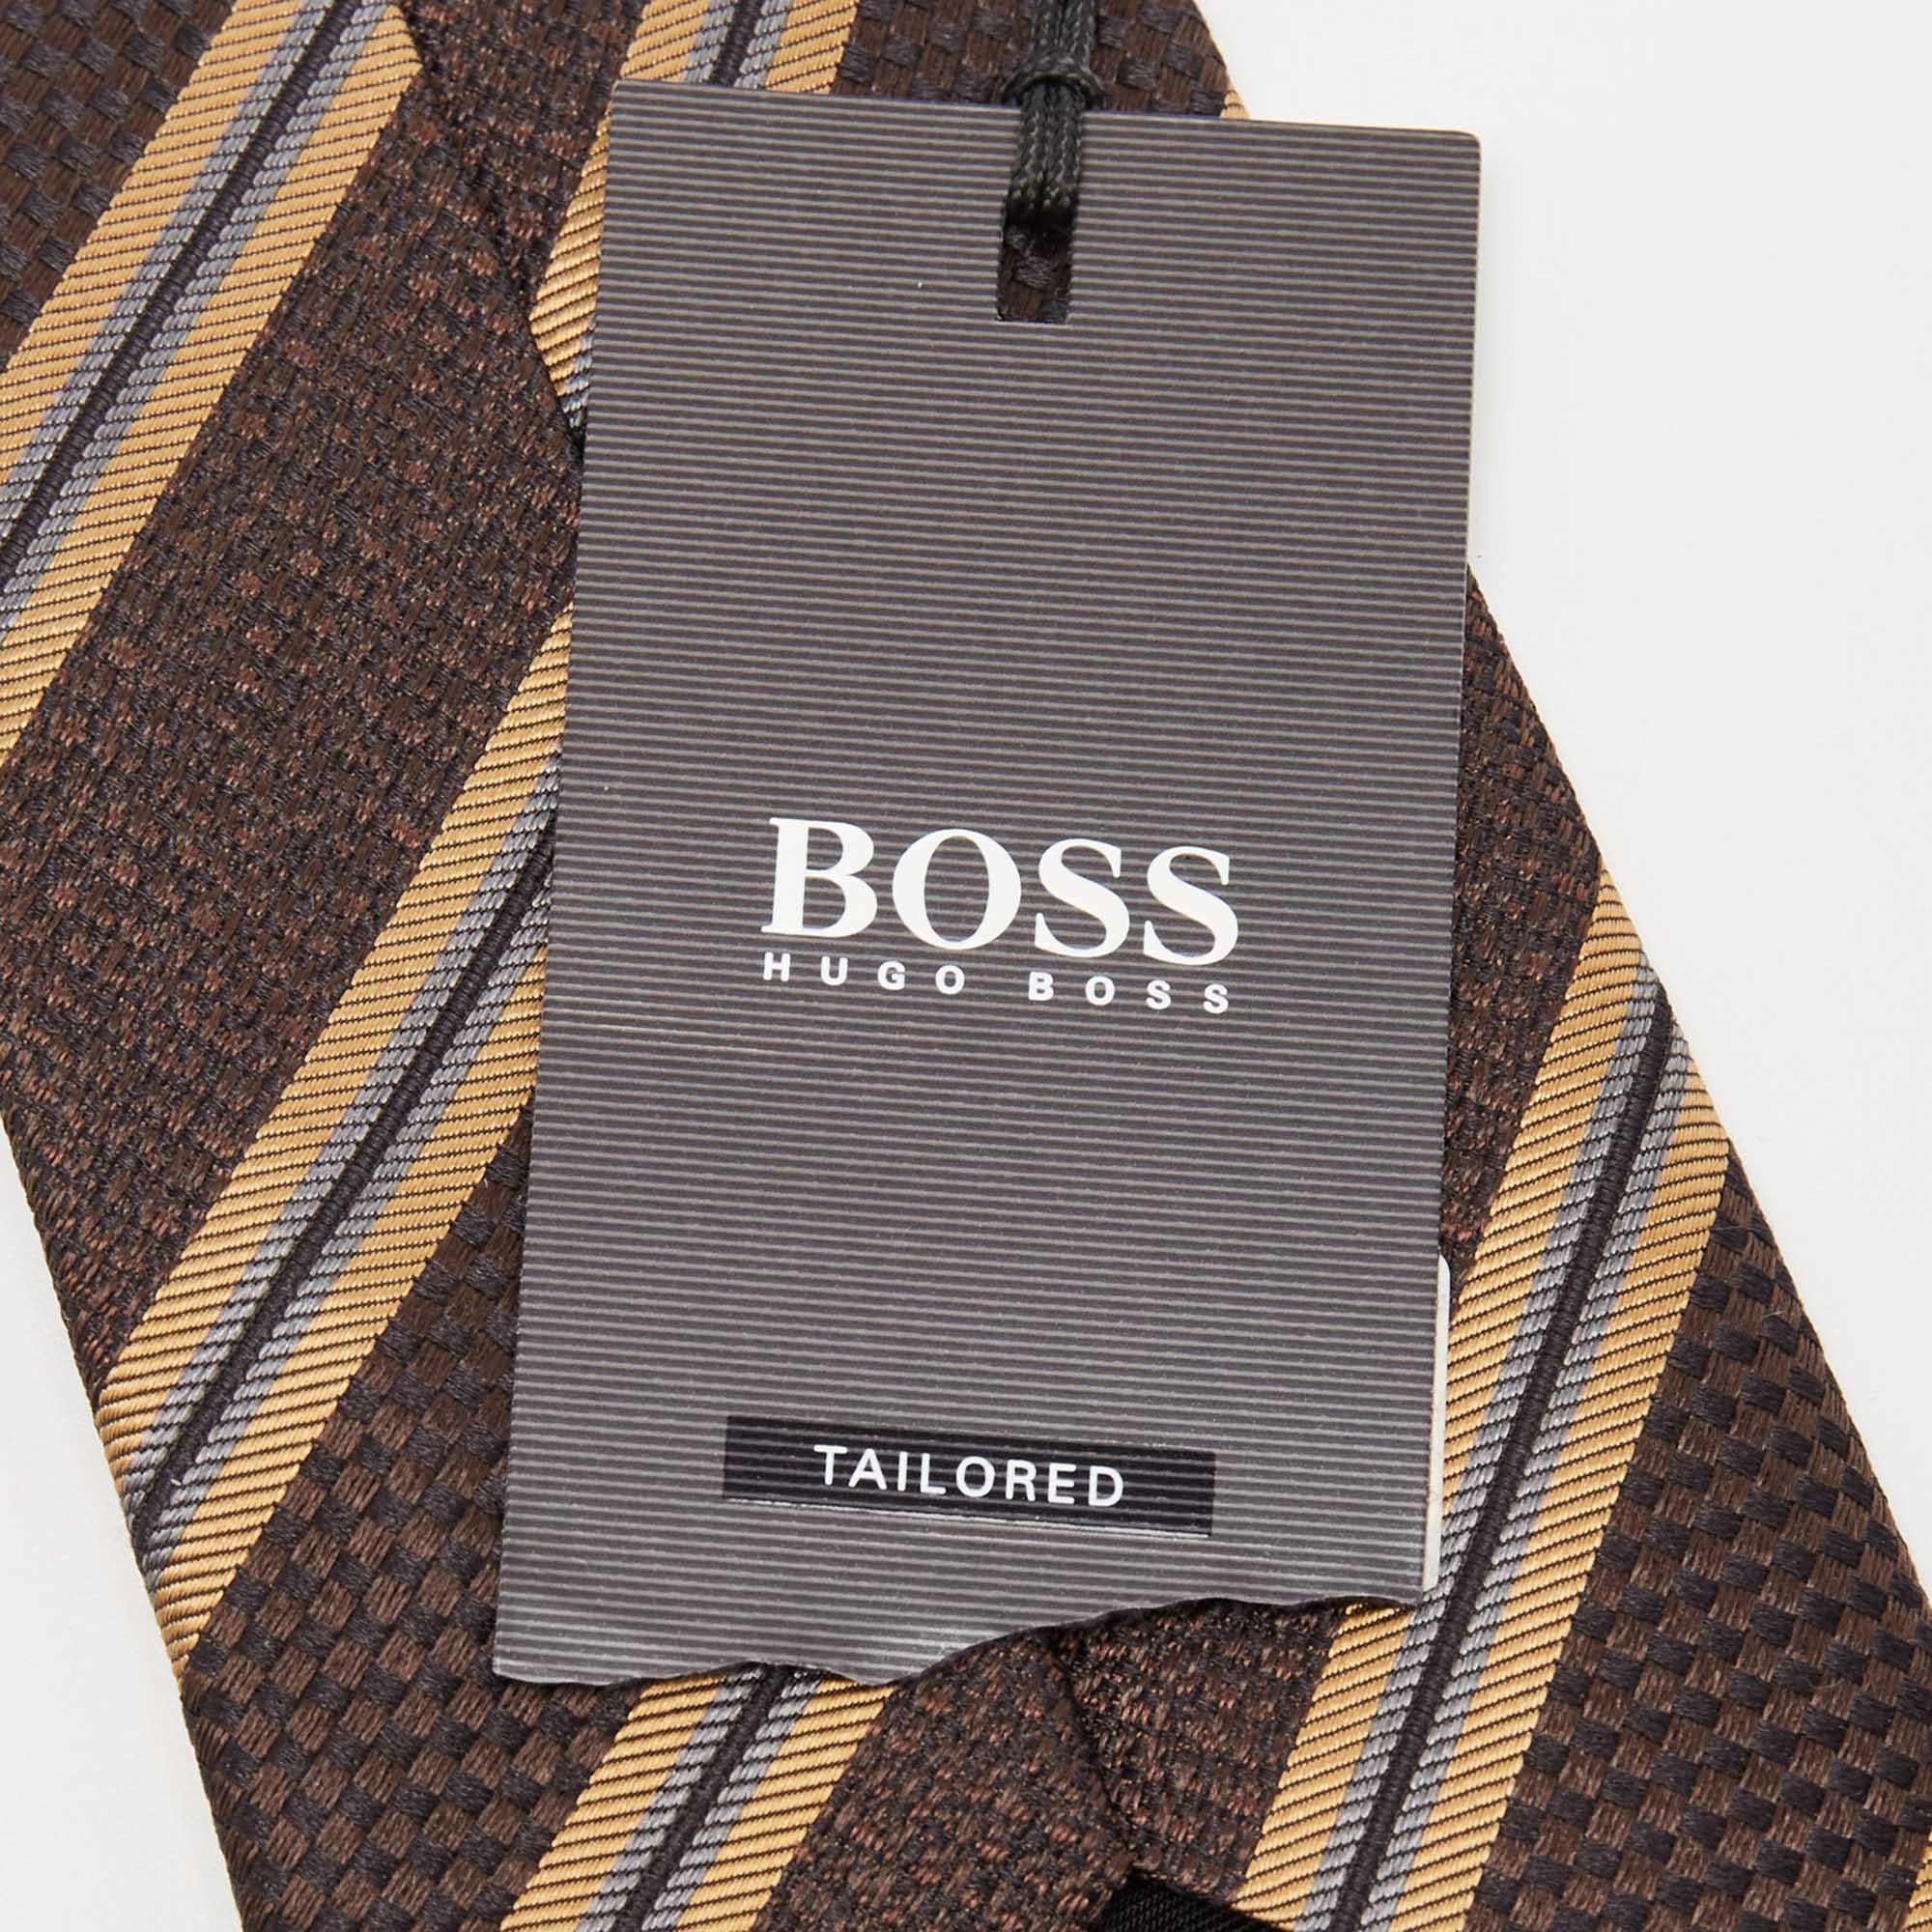 Made using silk, this Boss By Hugo Boss tie for men has stripes all over. This finely-tailored accessory will add a charming finish.

Includes: Price Tag